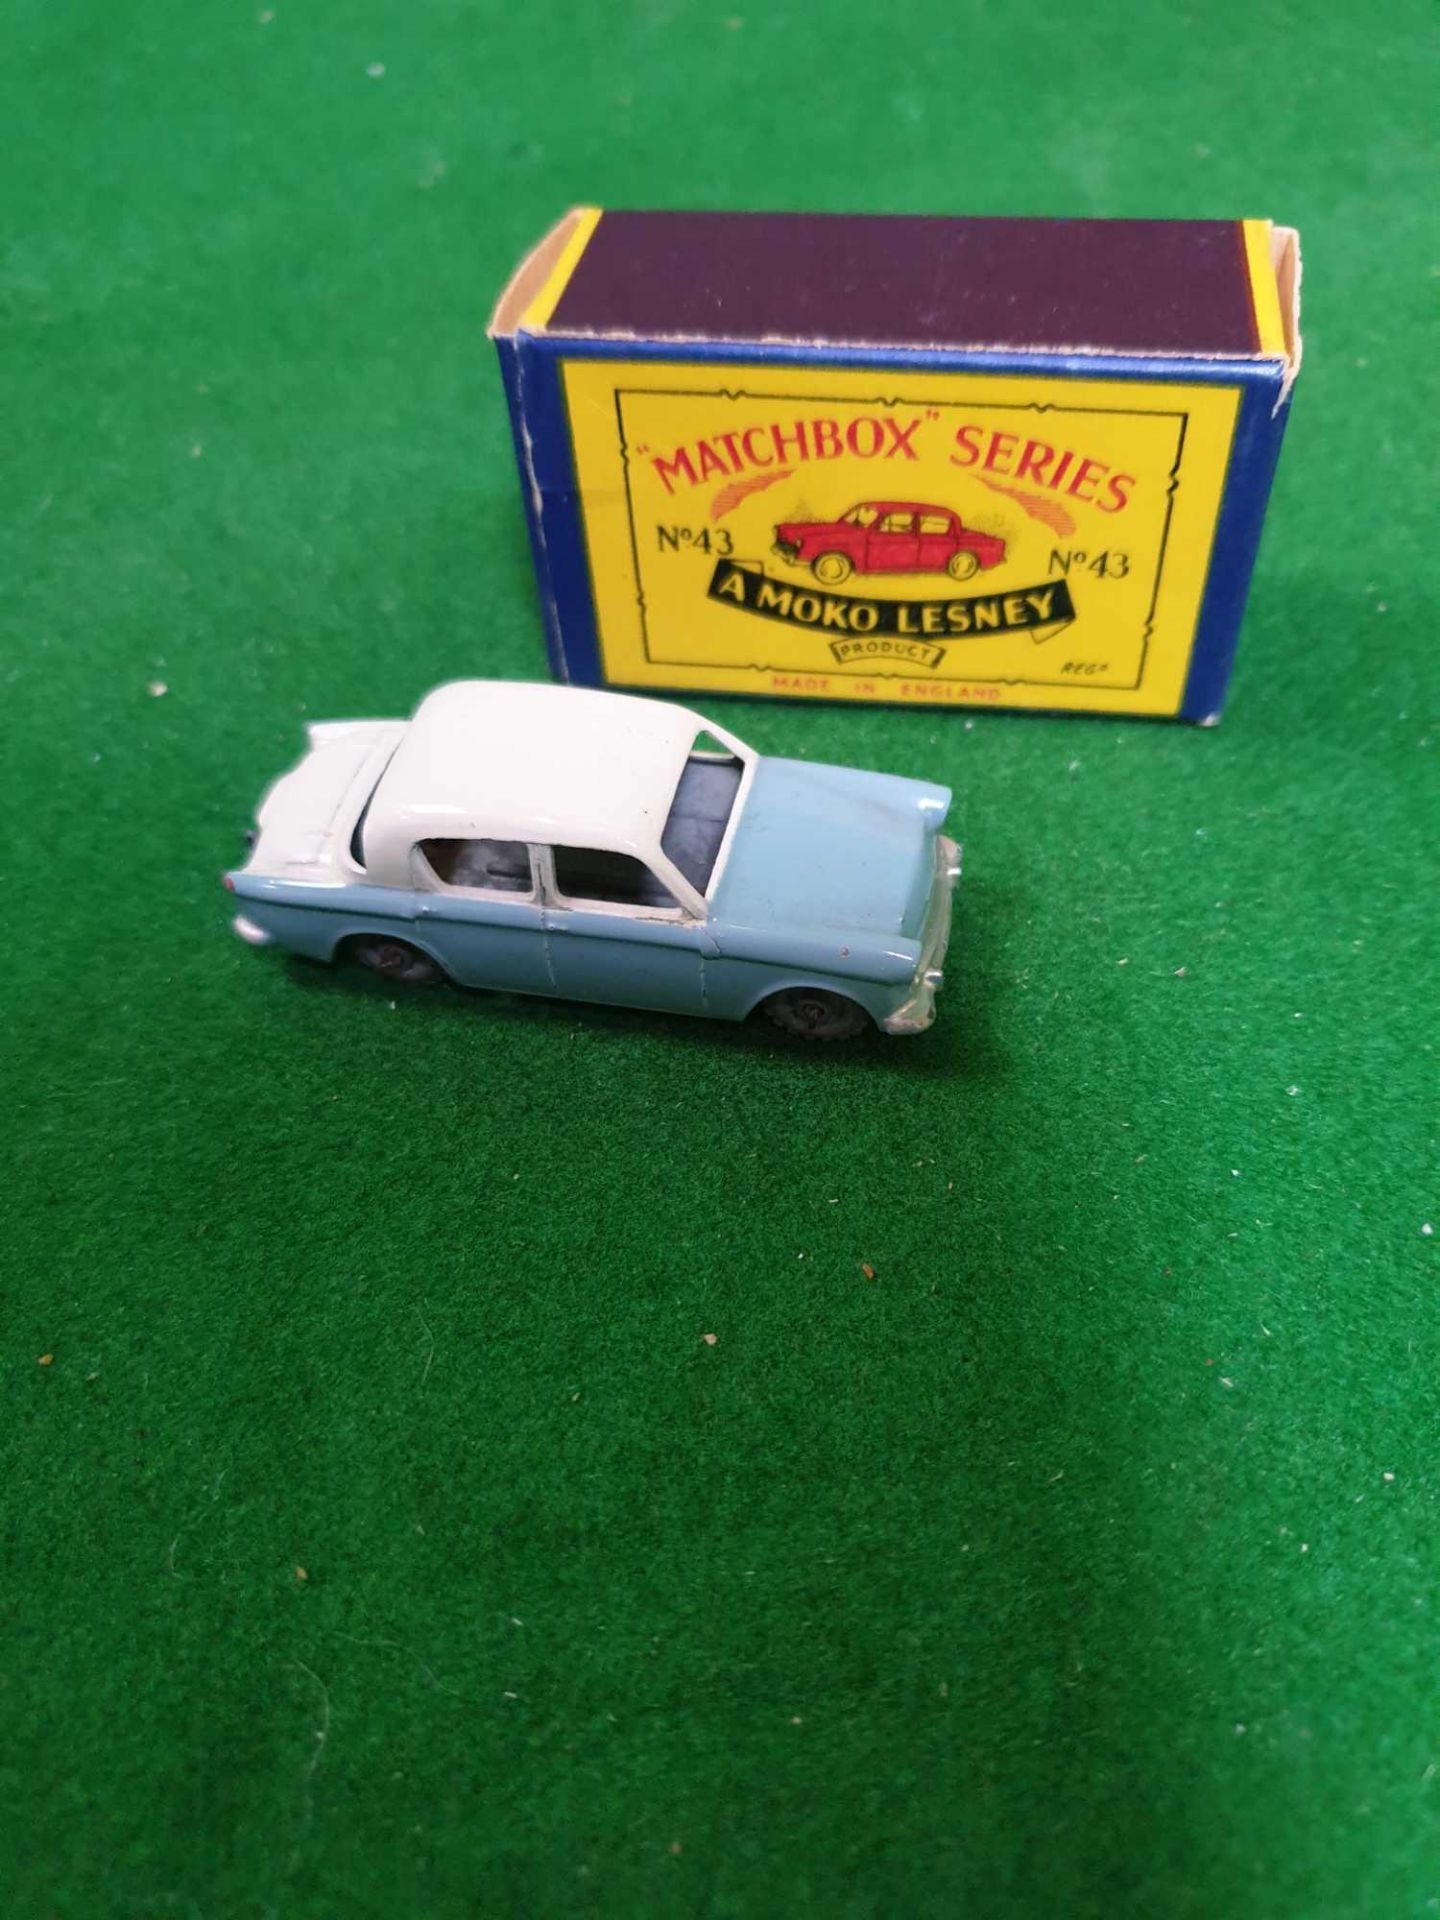 Matchbox Moko Lesney #43a Hillman Minx Two Tone Blue With Cream Roof Mint Model Firm Box 1959-1960 - Image 3 of 3